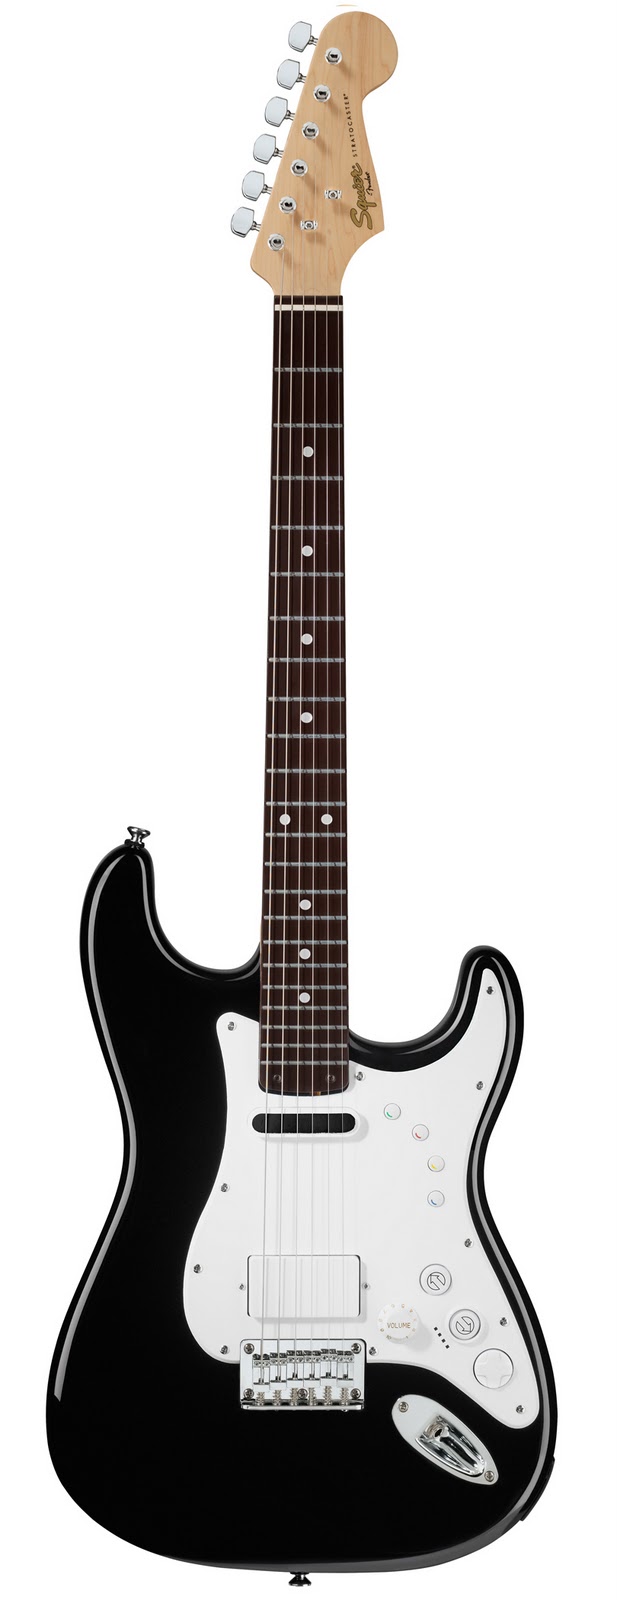 Squier By Fender Stratocaster Guitar And Controller